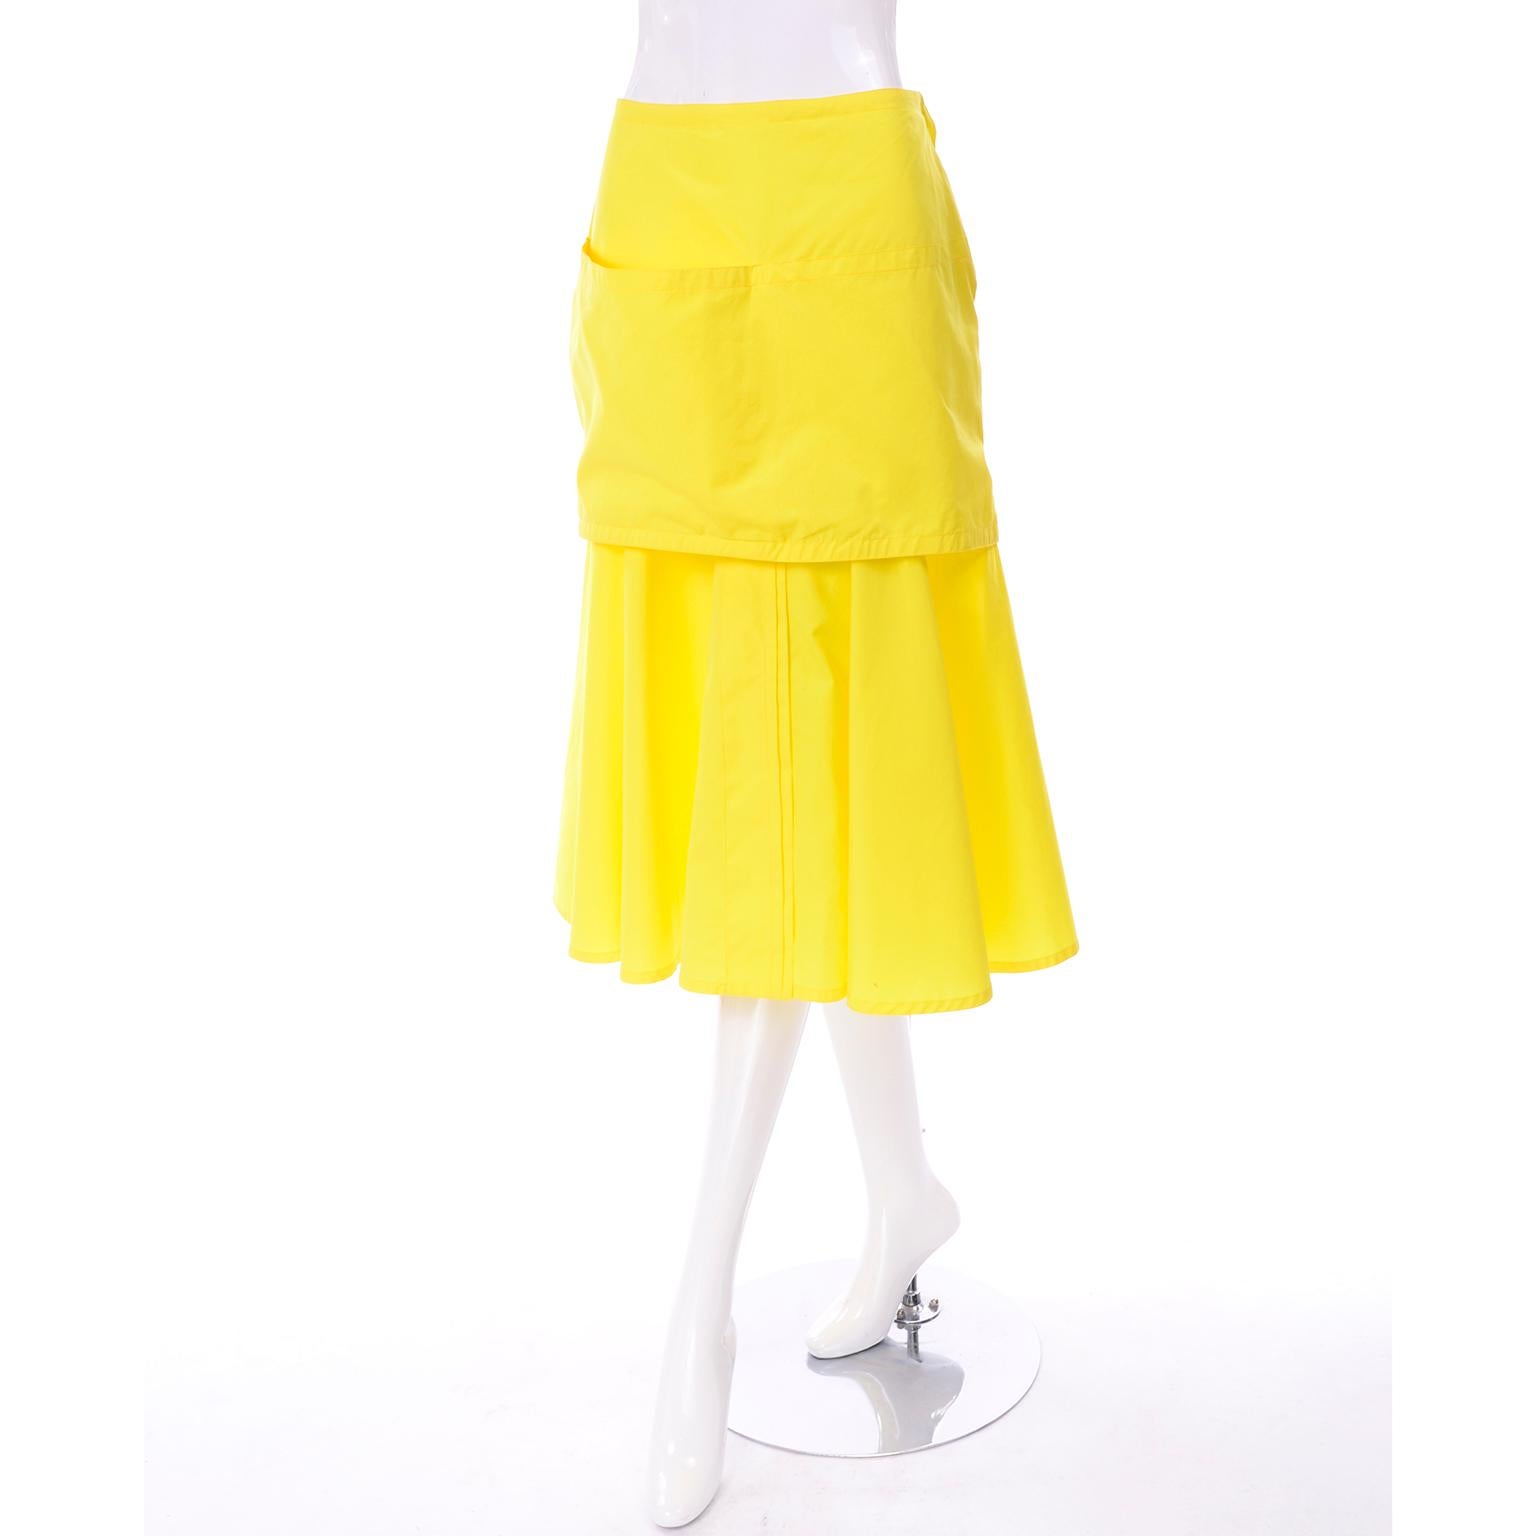 This is a very unique Gianni Versace bright yellow skirt with the original tags! It is a flared skirt, with a connected piece that looks like a mini skirt! It has one large pocket on the right side of the shorter skirt, giving it the look of an